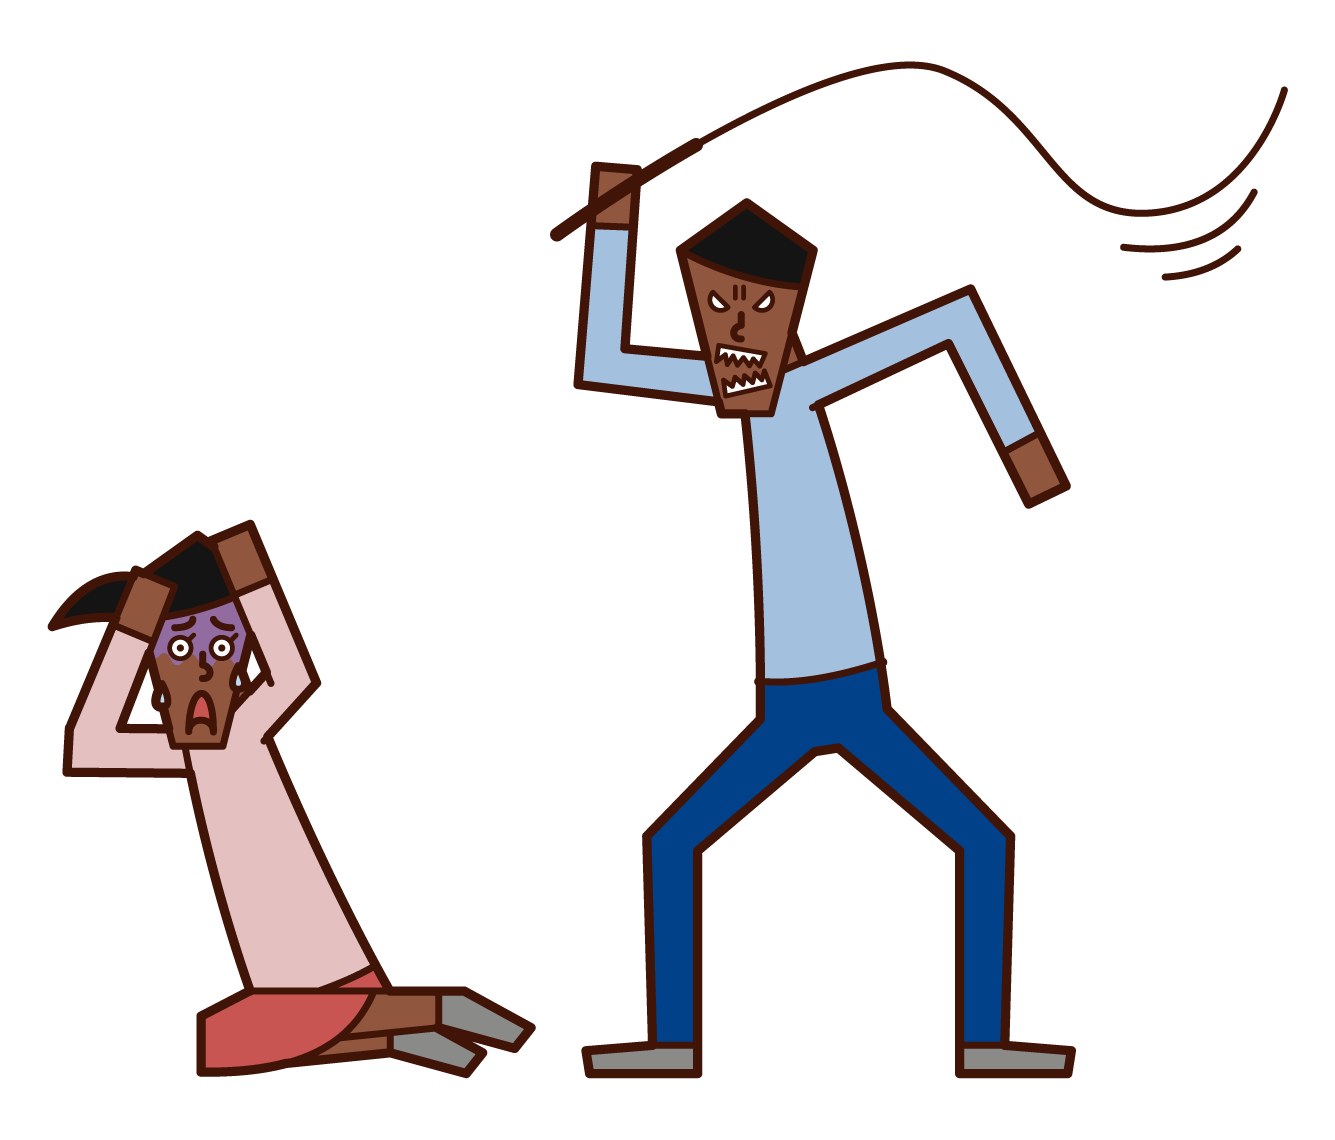 Illustration of a man who commits domestic violence